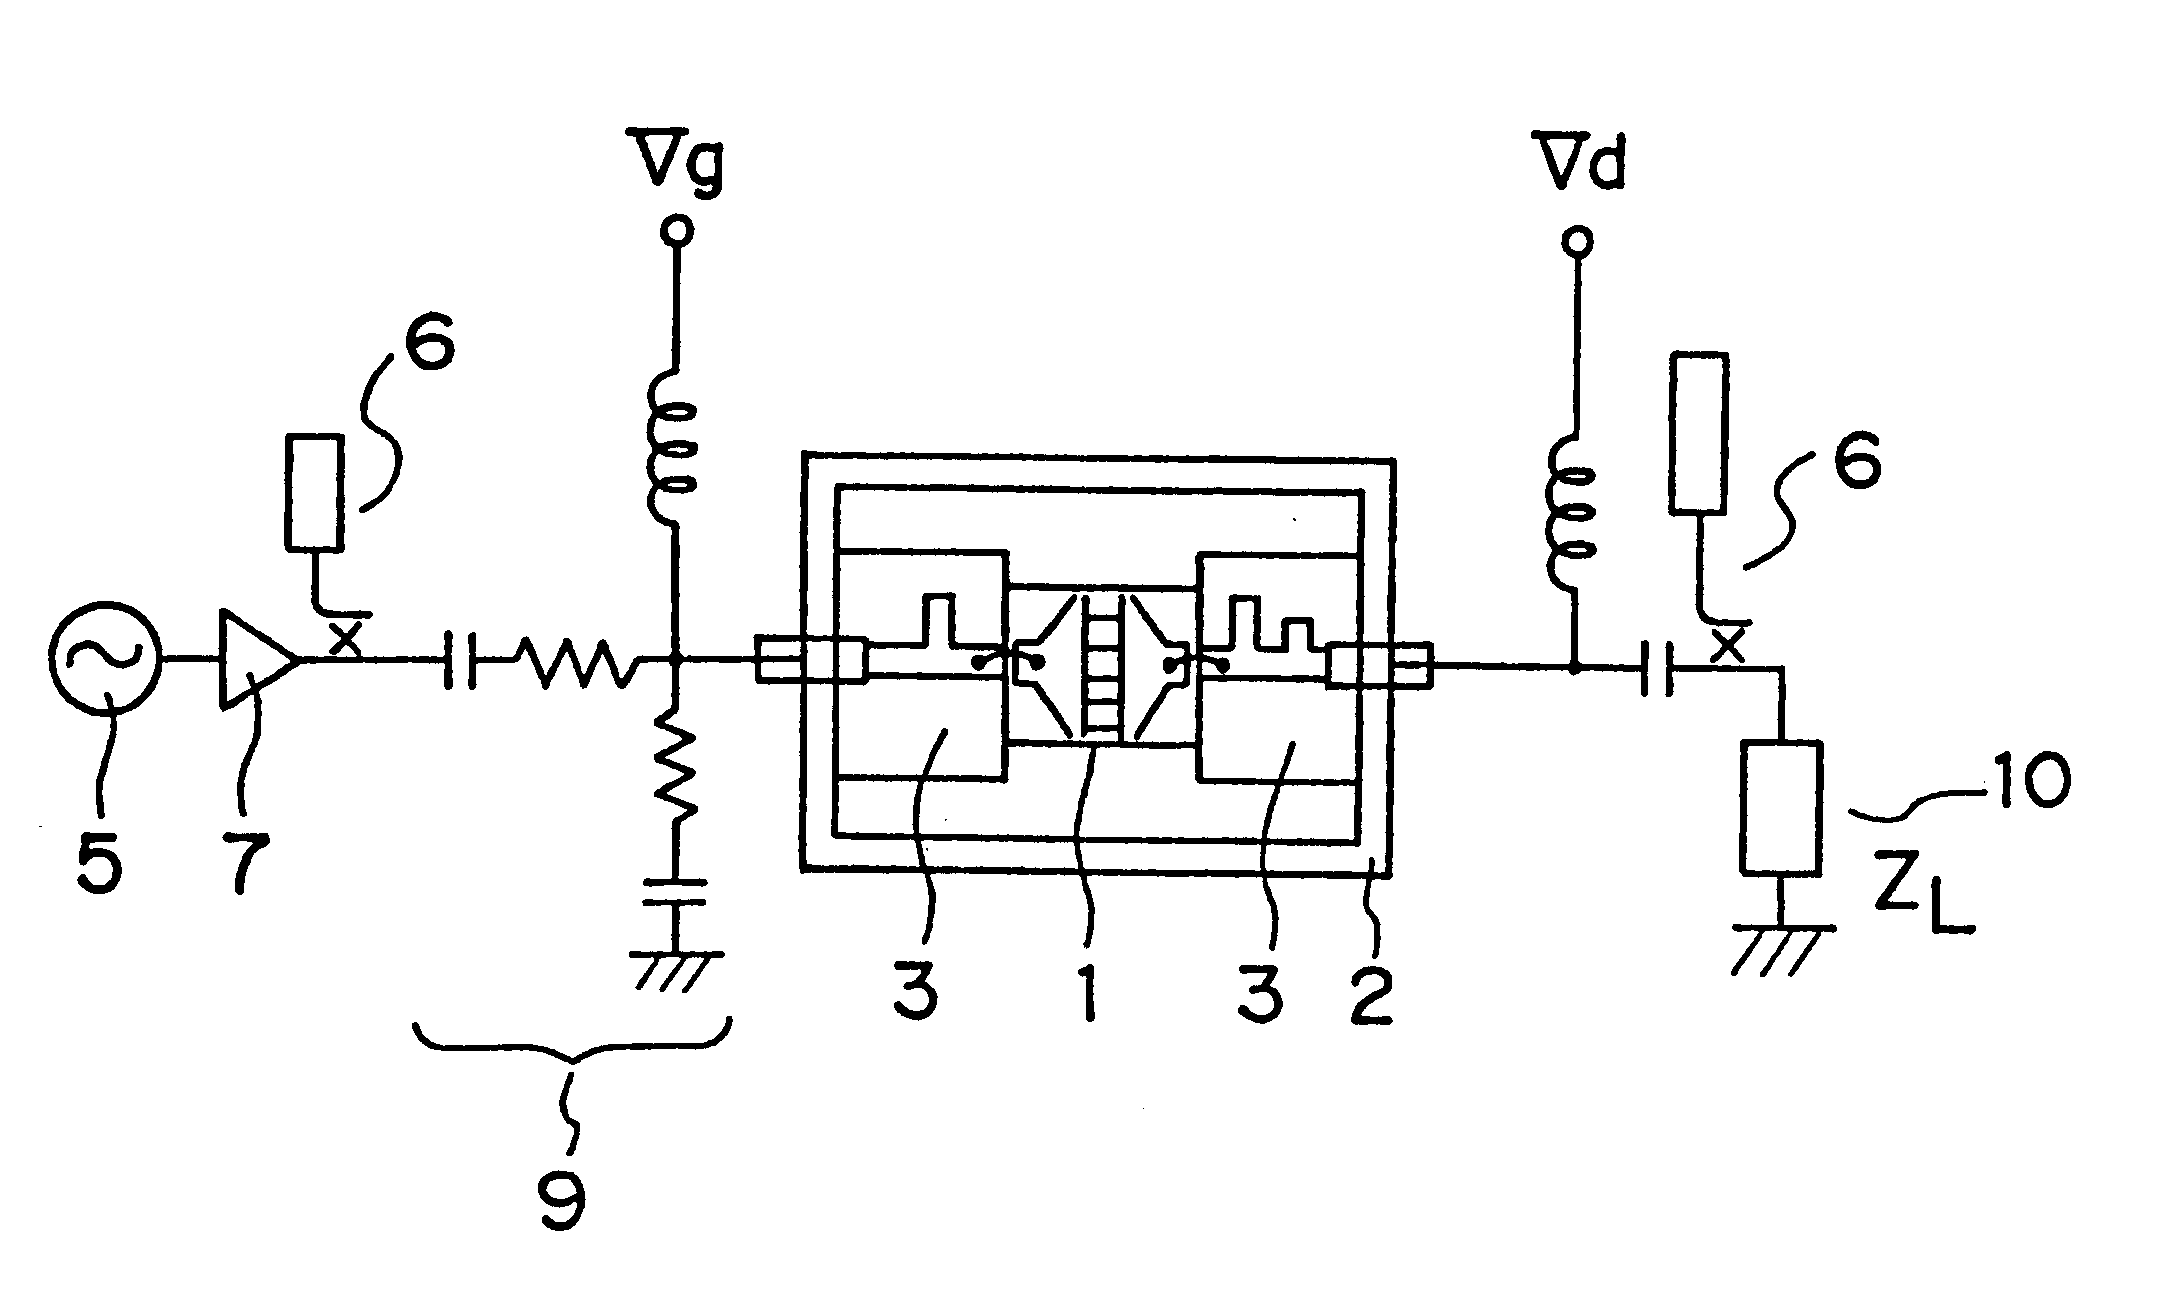 Microwave transistor subjected to burn-in testing